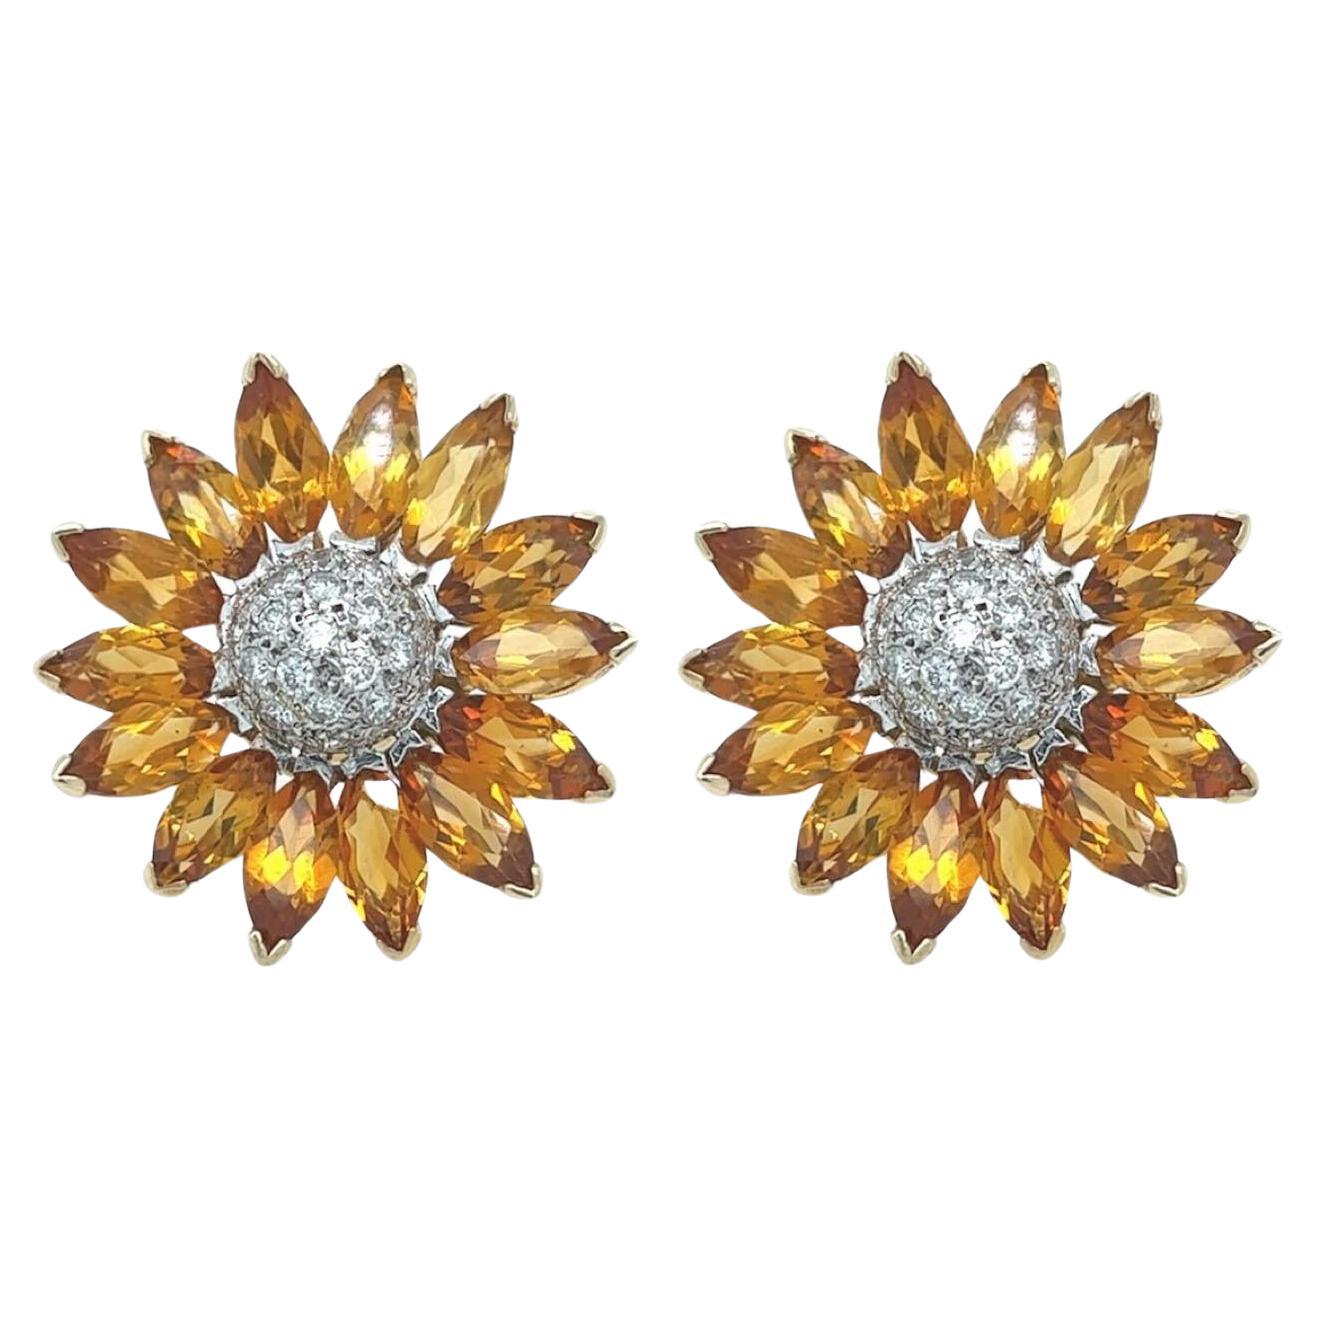 A Pair of Yellow gold, White Gold, Citrine and Diamond Earrings